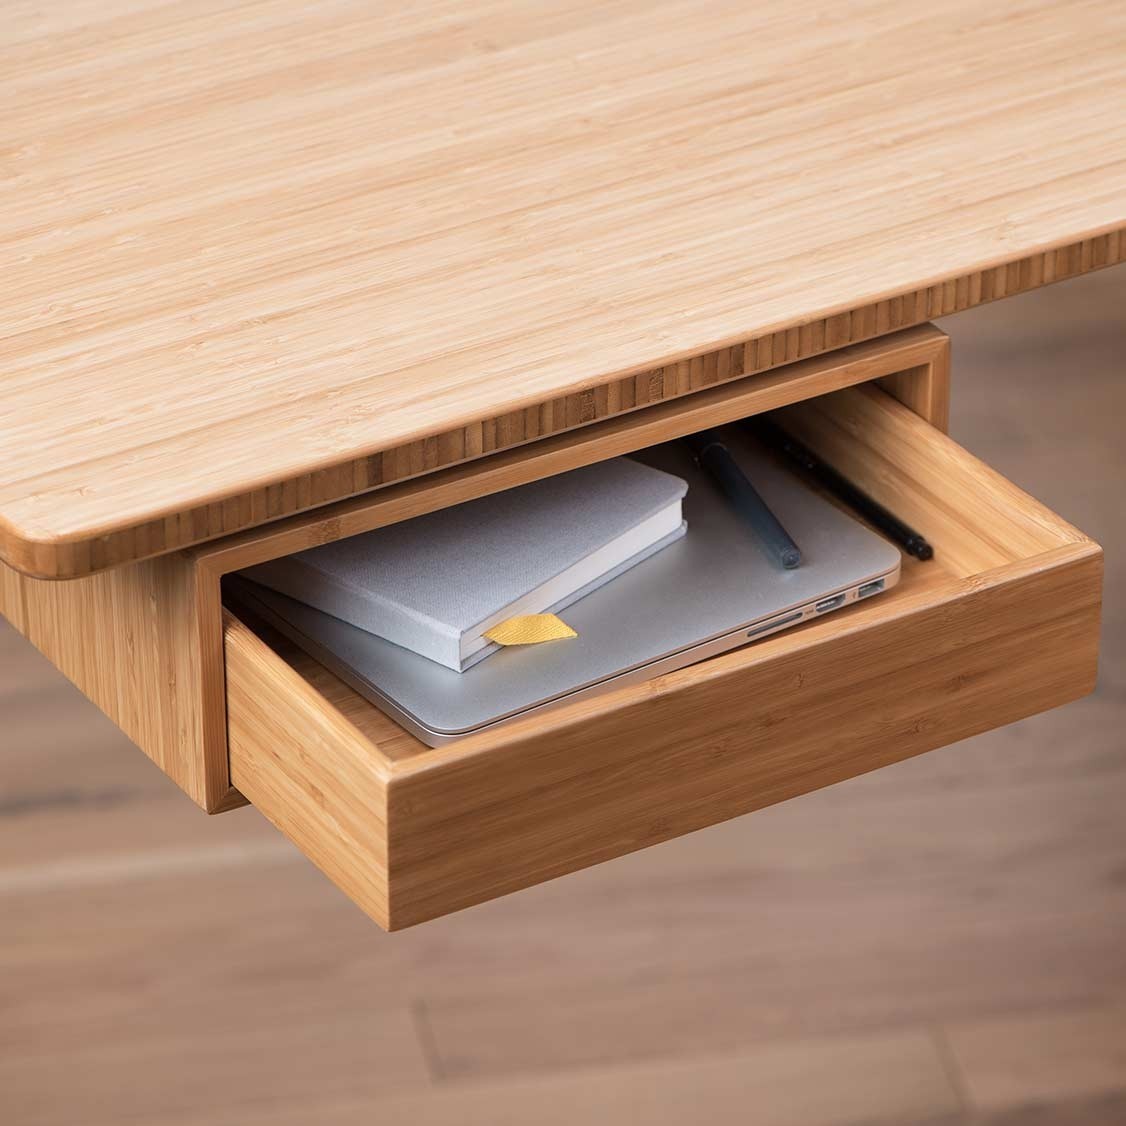 Jarvis vs Uplift: Who Has a Better Desk Drawer for your Office?